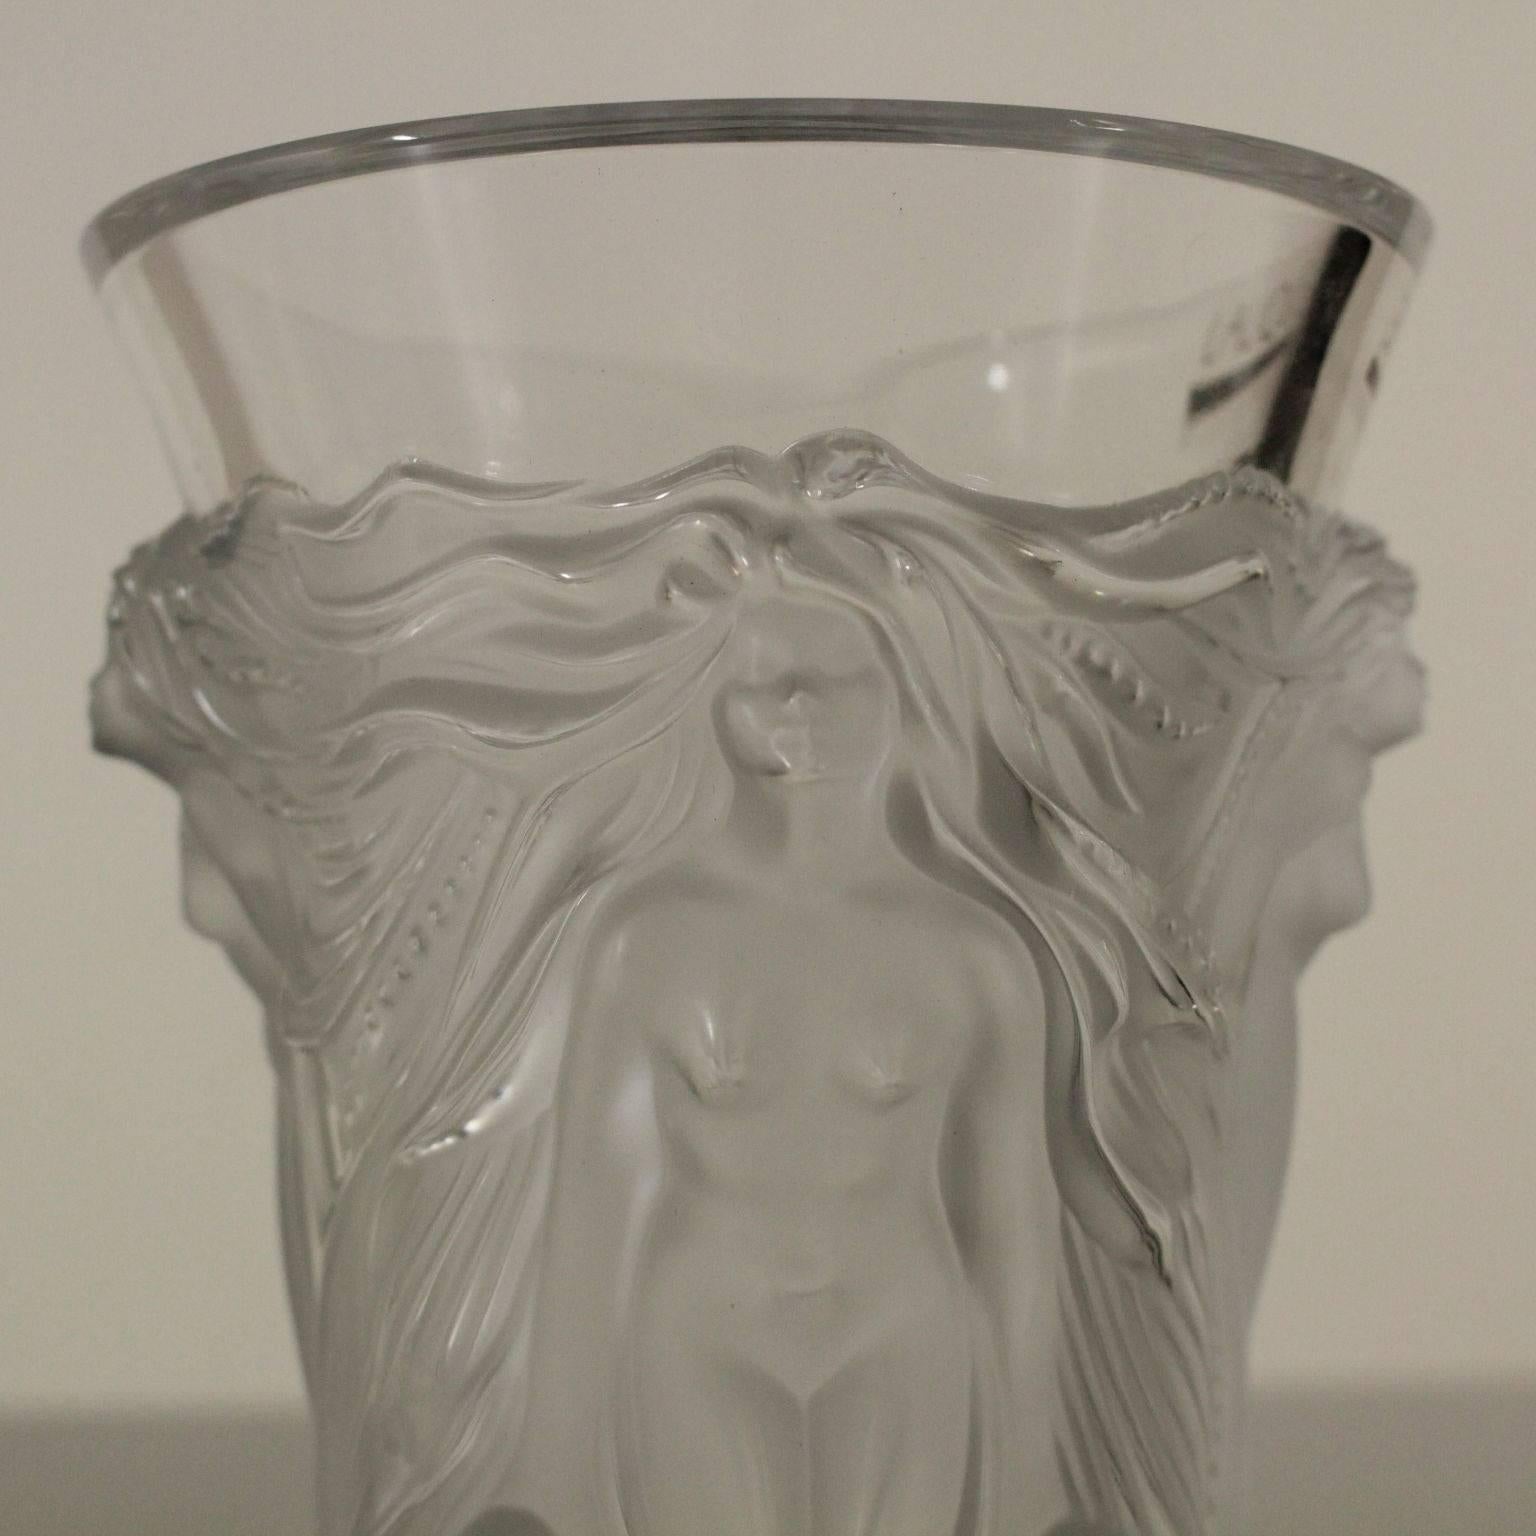 French Crystal Vase by Lalique Relief Decoration Depicting Nymphs, Paris, 20th Century